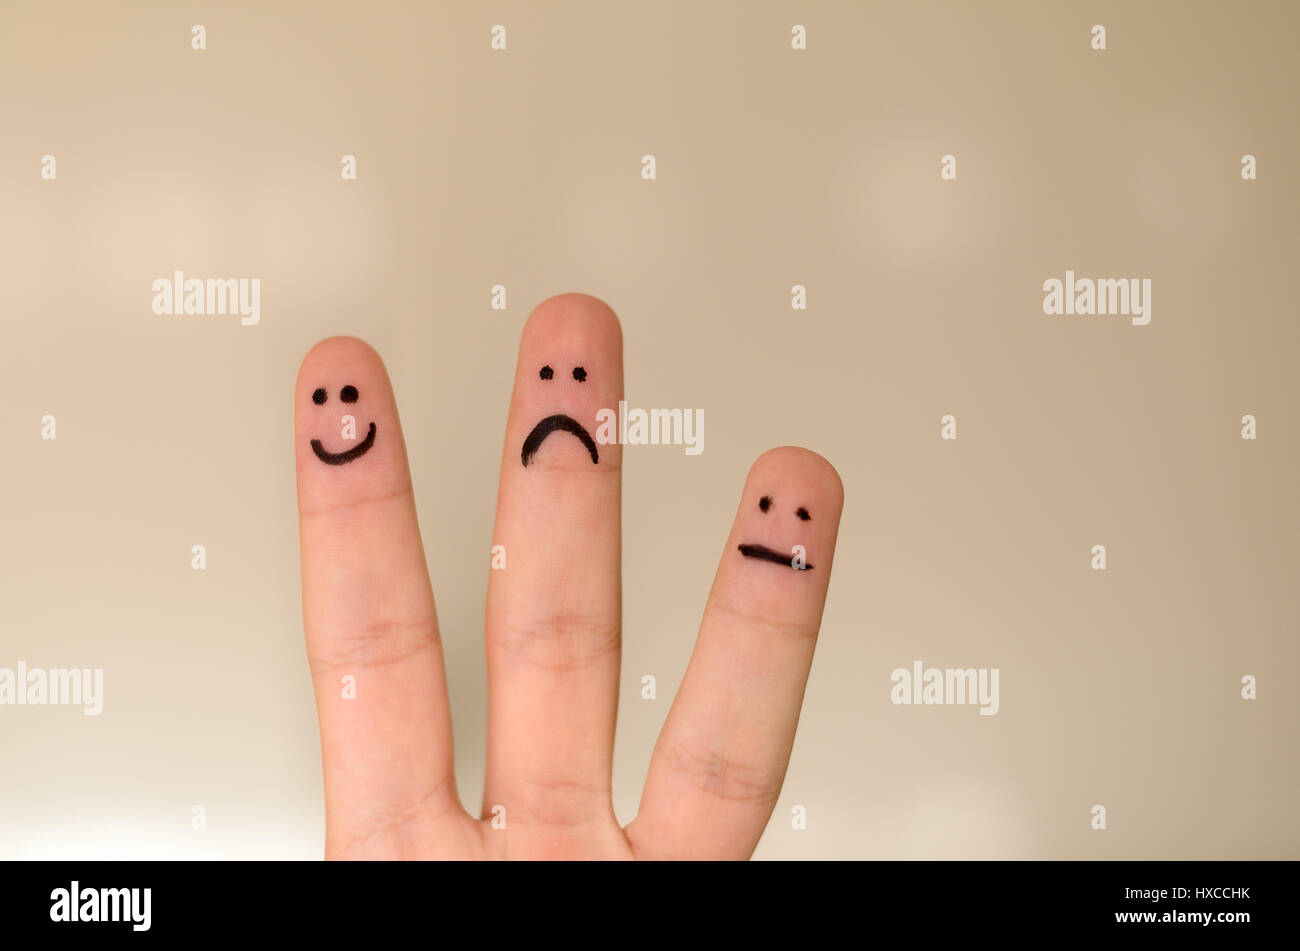 Three different emoticons hand drawn on fingers with a black marker pen with a happy smiling face, unhappy sad face and calm unemotional face isolated Stock Photo